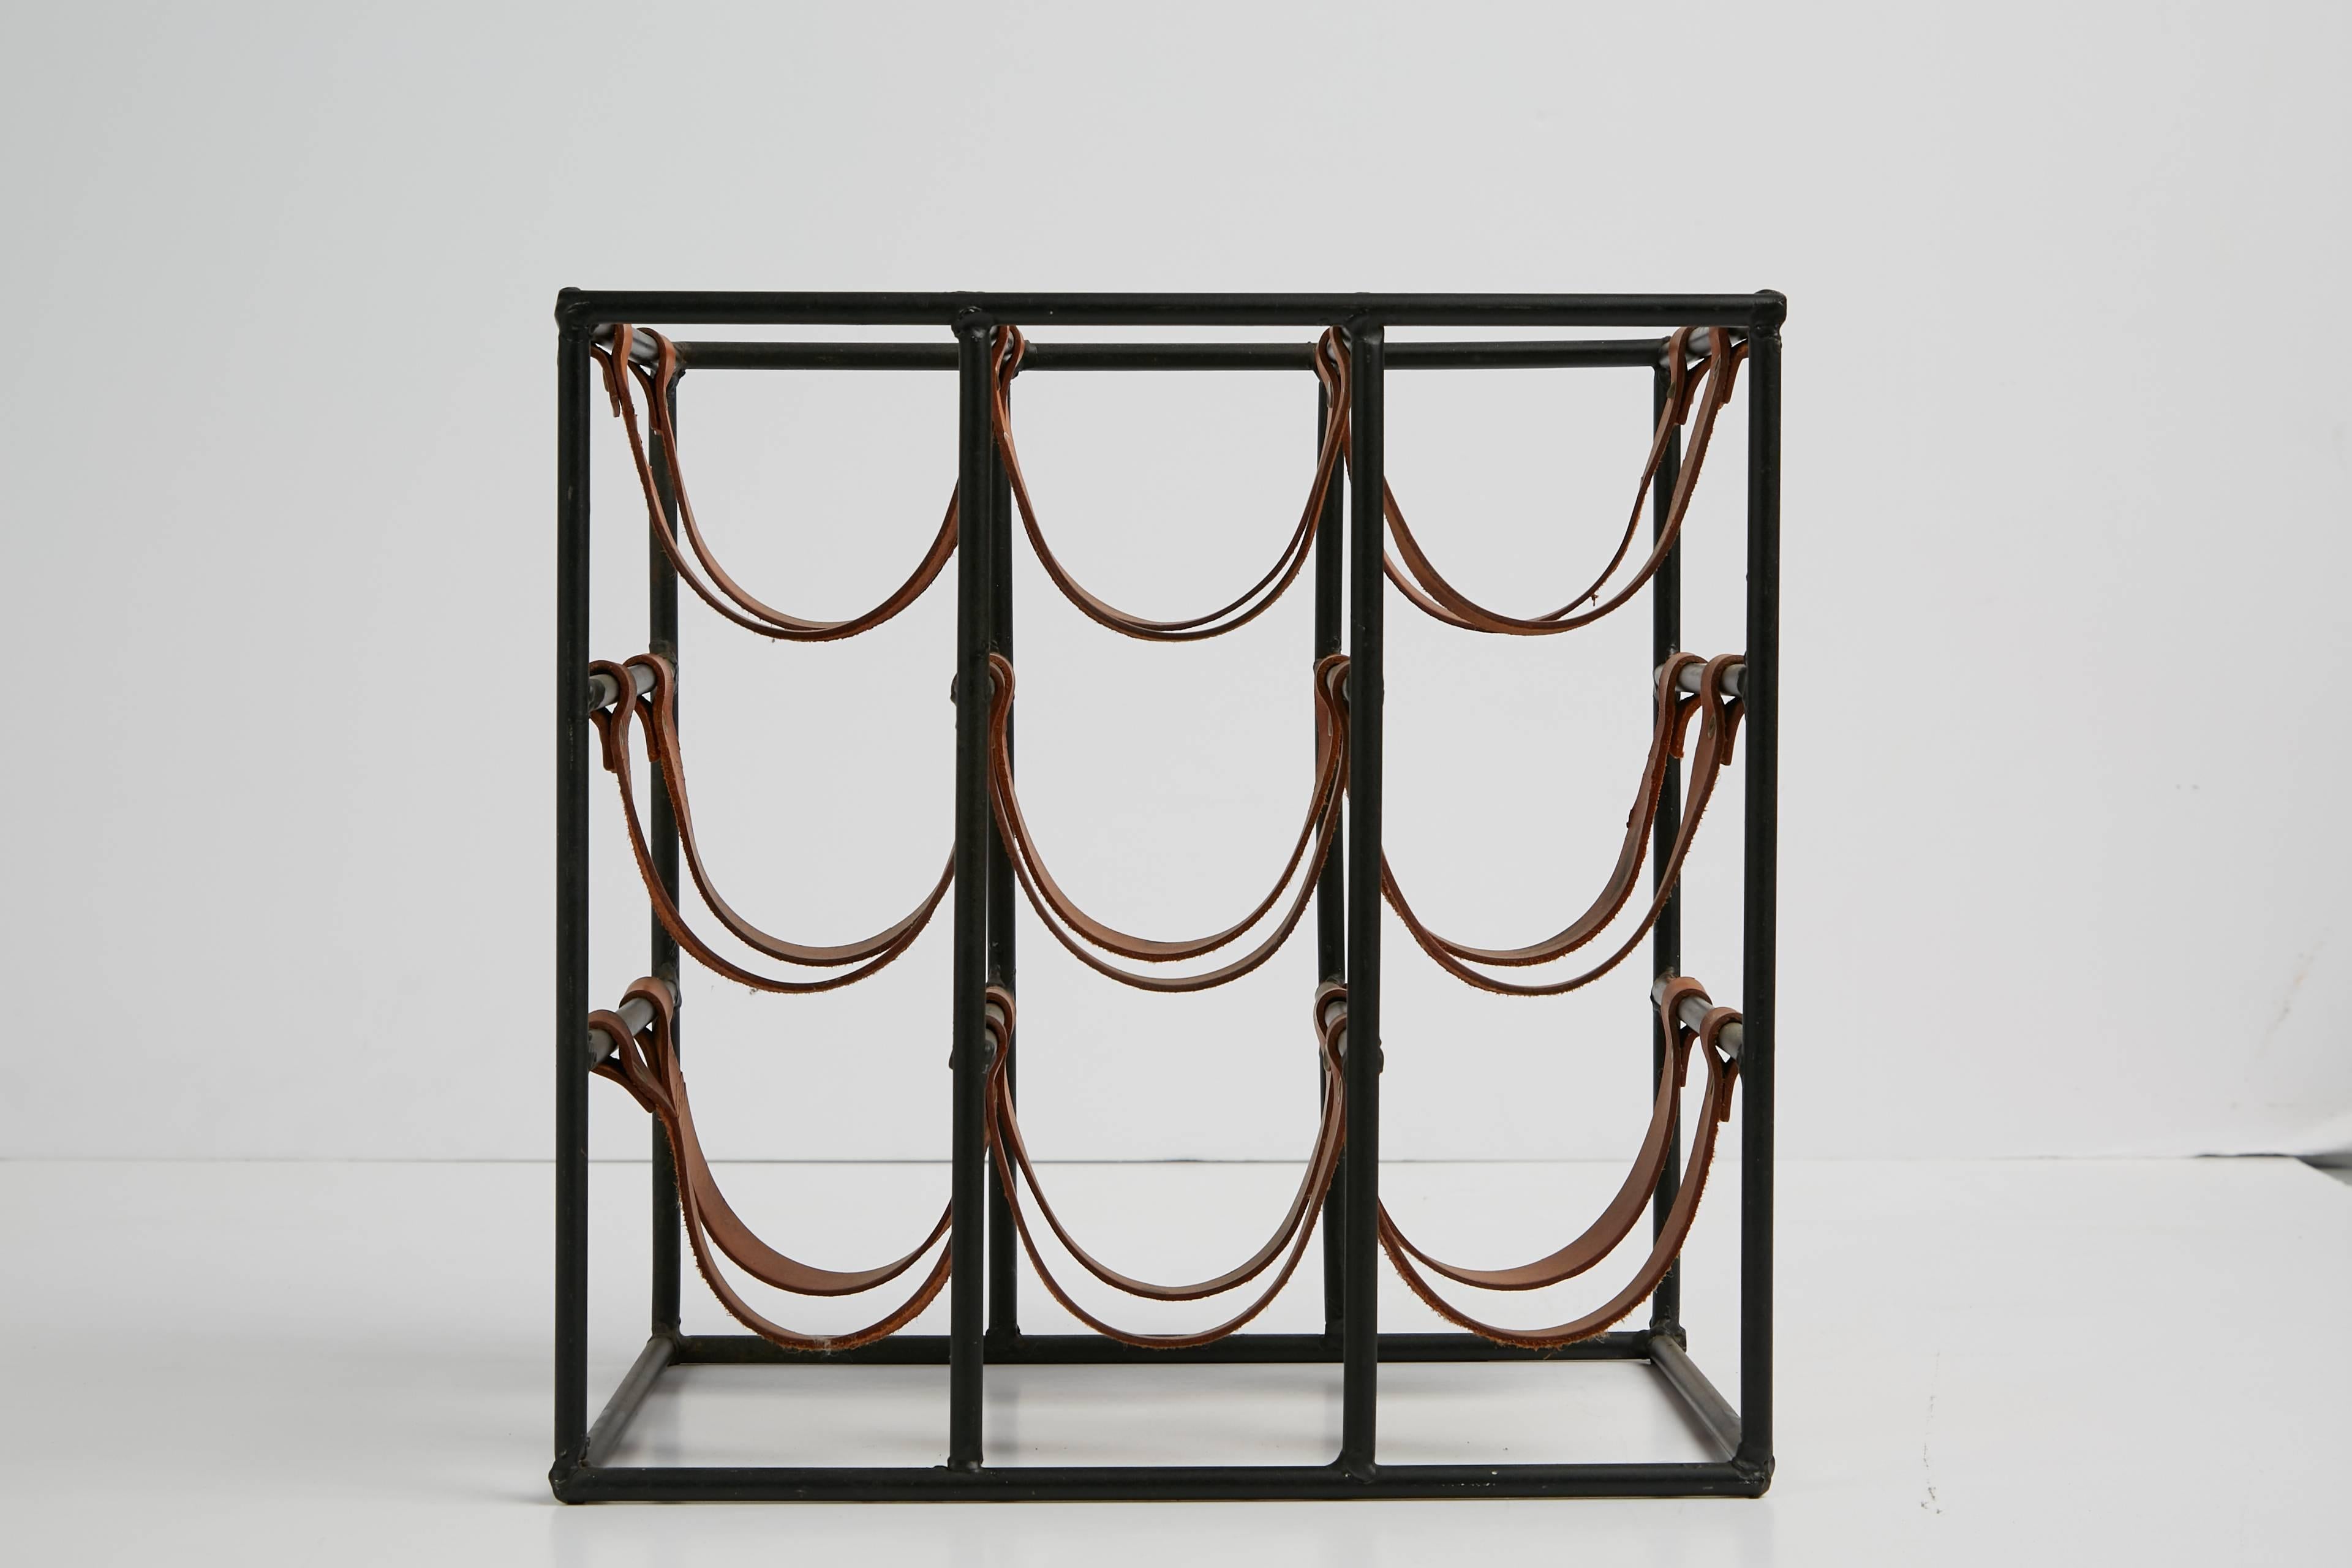 Sculptural iron and leather wine rack by Arthur Umanoff for Shaver Howard. Featuring a solid iron frame with original saddle leather straps to hold nine bottles. The unique design can be viewed at any angle and would make a great display piece for a